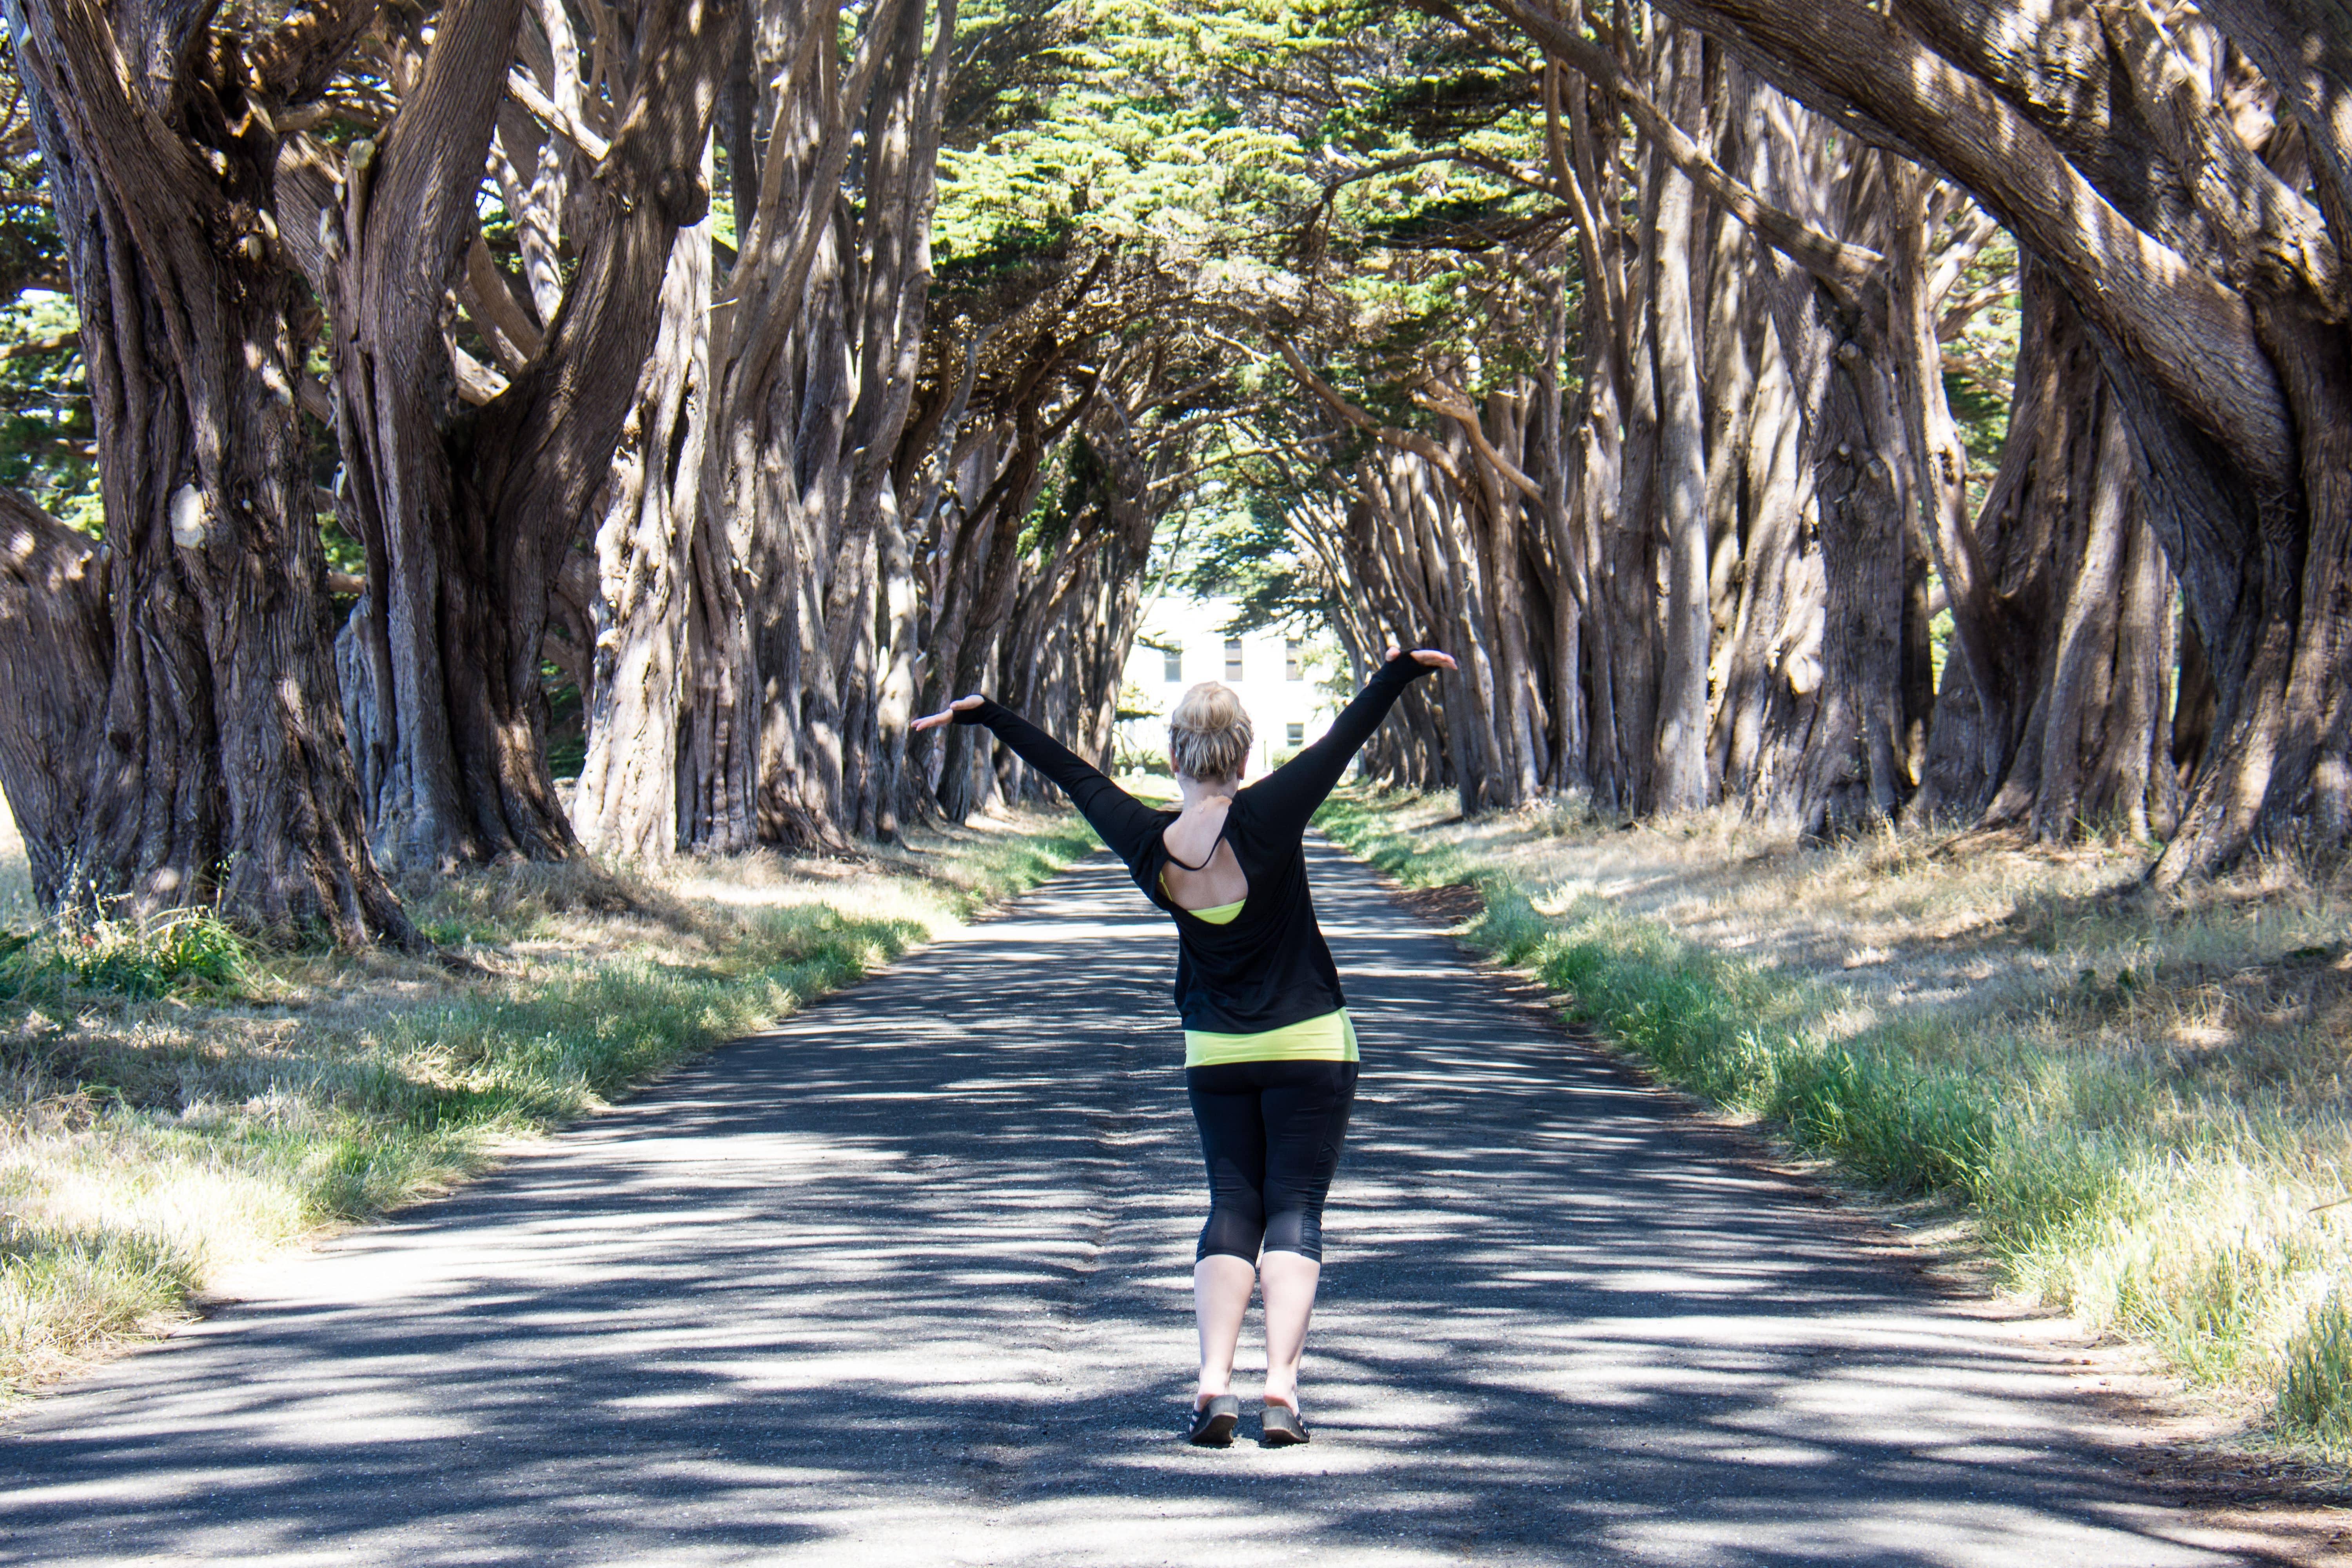 A woman enjoys some exercise in Point Reyes. (Shutterstock)